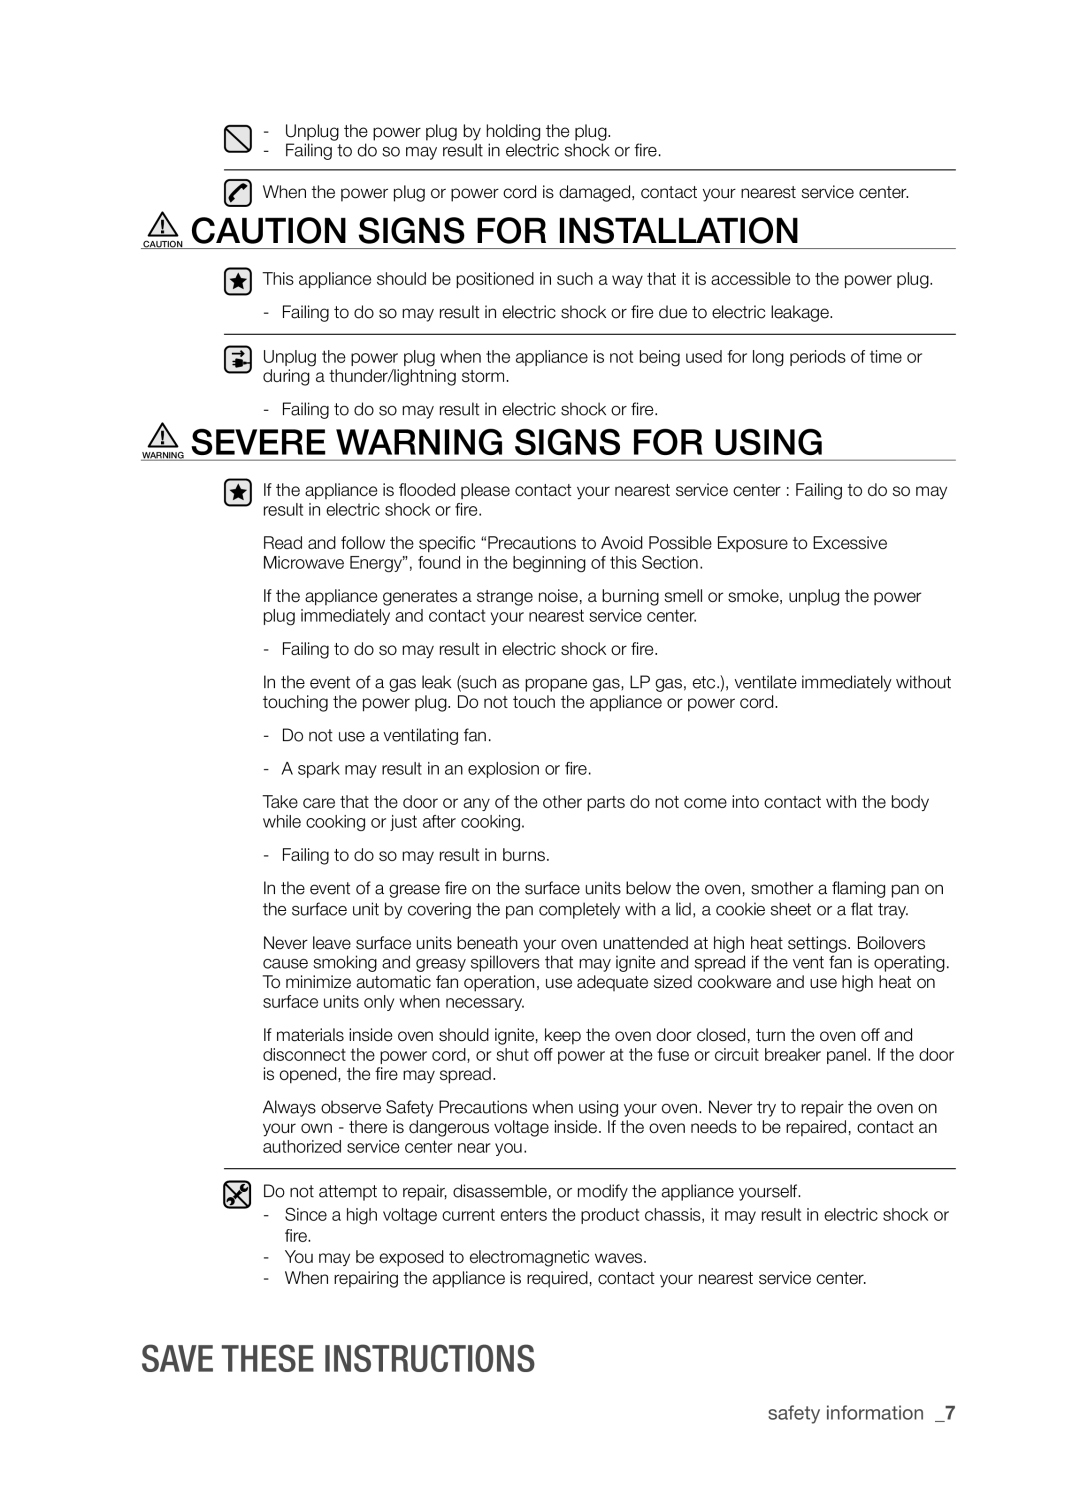 Samsung SMH9207 Caution Caution Signs For Installation, Warning Severe Warning Signs For Using, Save these instructions 